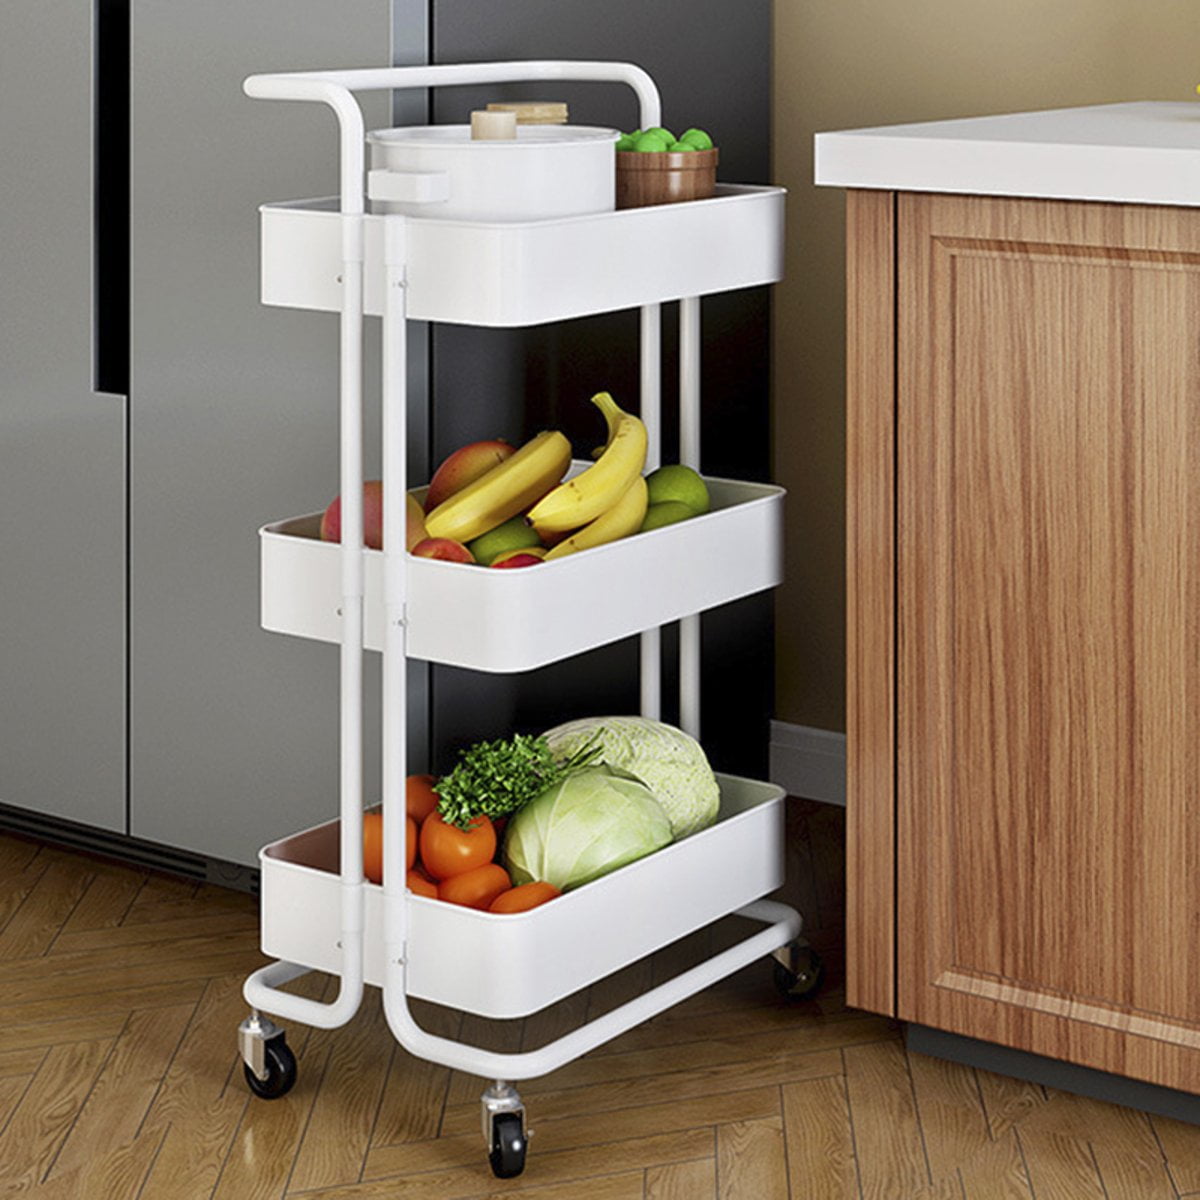 White Ceeyali 3-Tier Rolling Utility Cart Storage Shelf Multifunction Organizer Storage Cart with Handle and Lockable Wheels and 3PCS Cup for Home Kitchen,Bathroom,Office,Laundry Room etc.